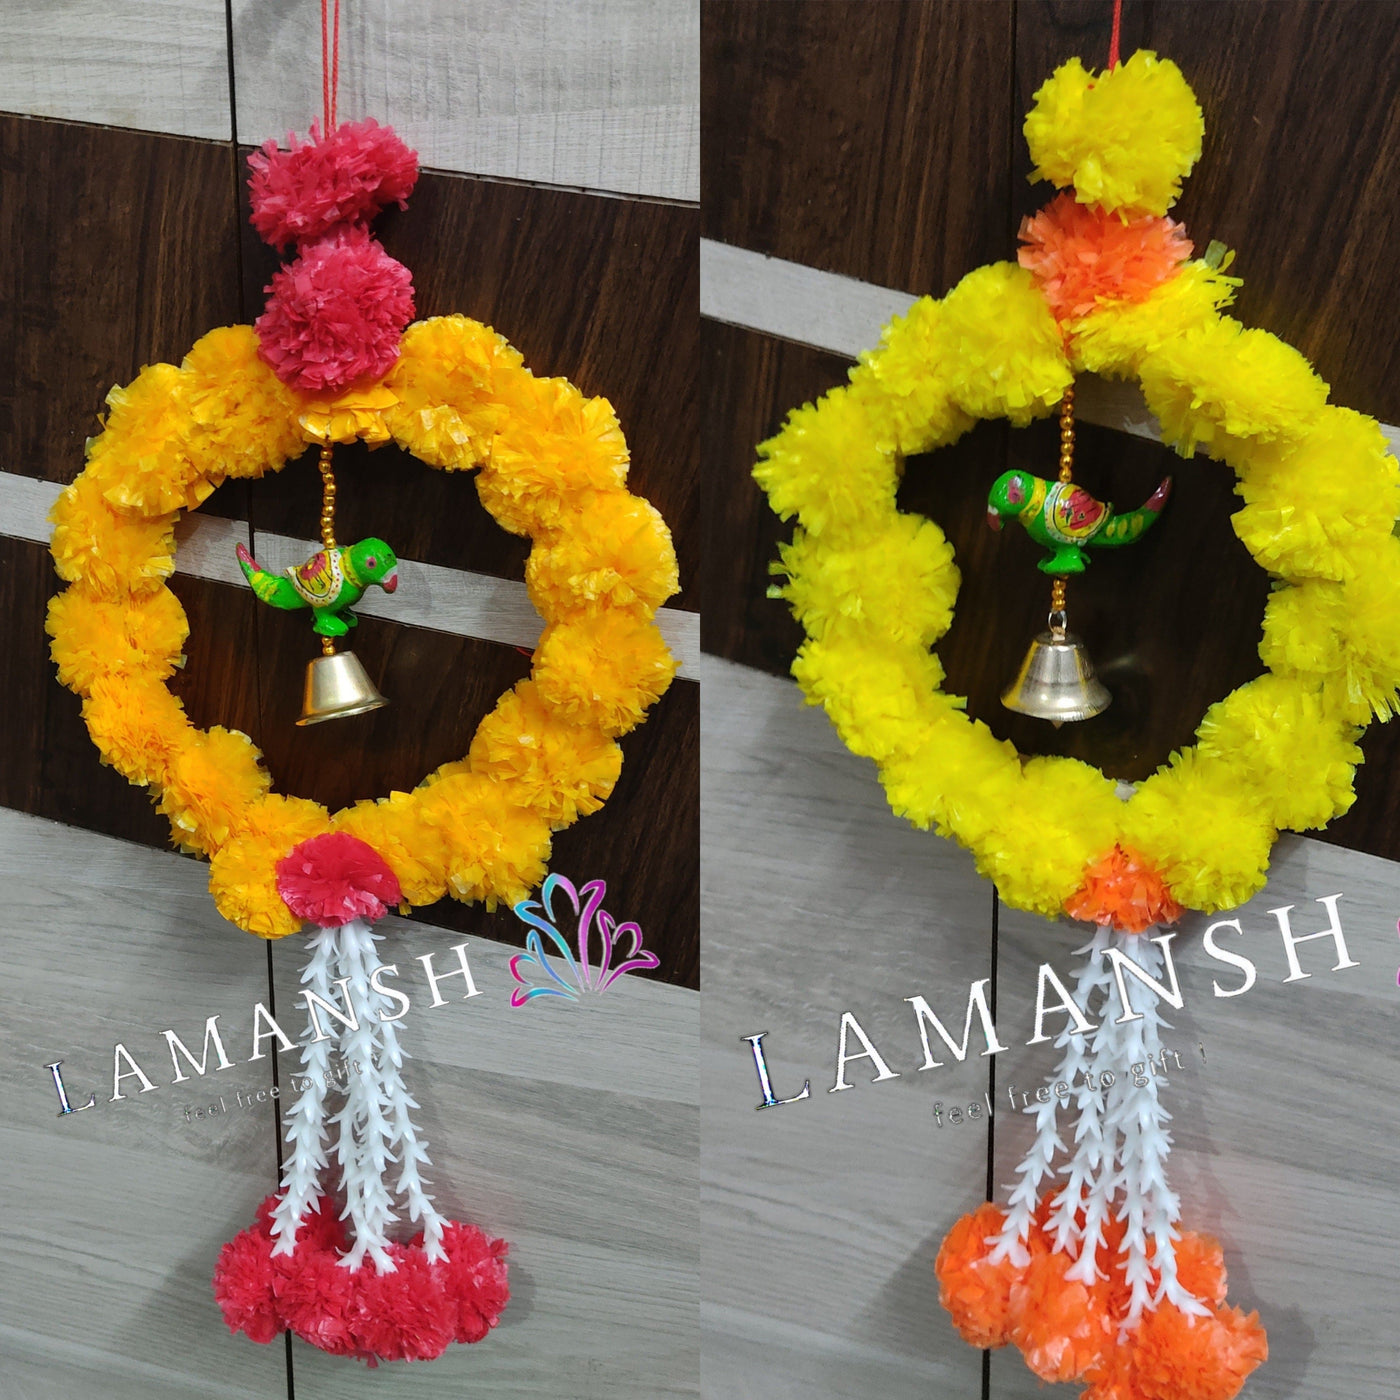 Lamansh event decoration hangings 10 LAMANSH® 1.5 ft height 10 pcs Genda Flower Parrot hangings in Assorted colors for indian wedding decoration & backdrops / ethnic event decoration products